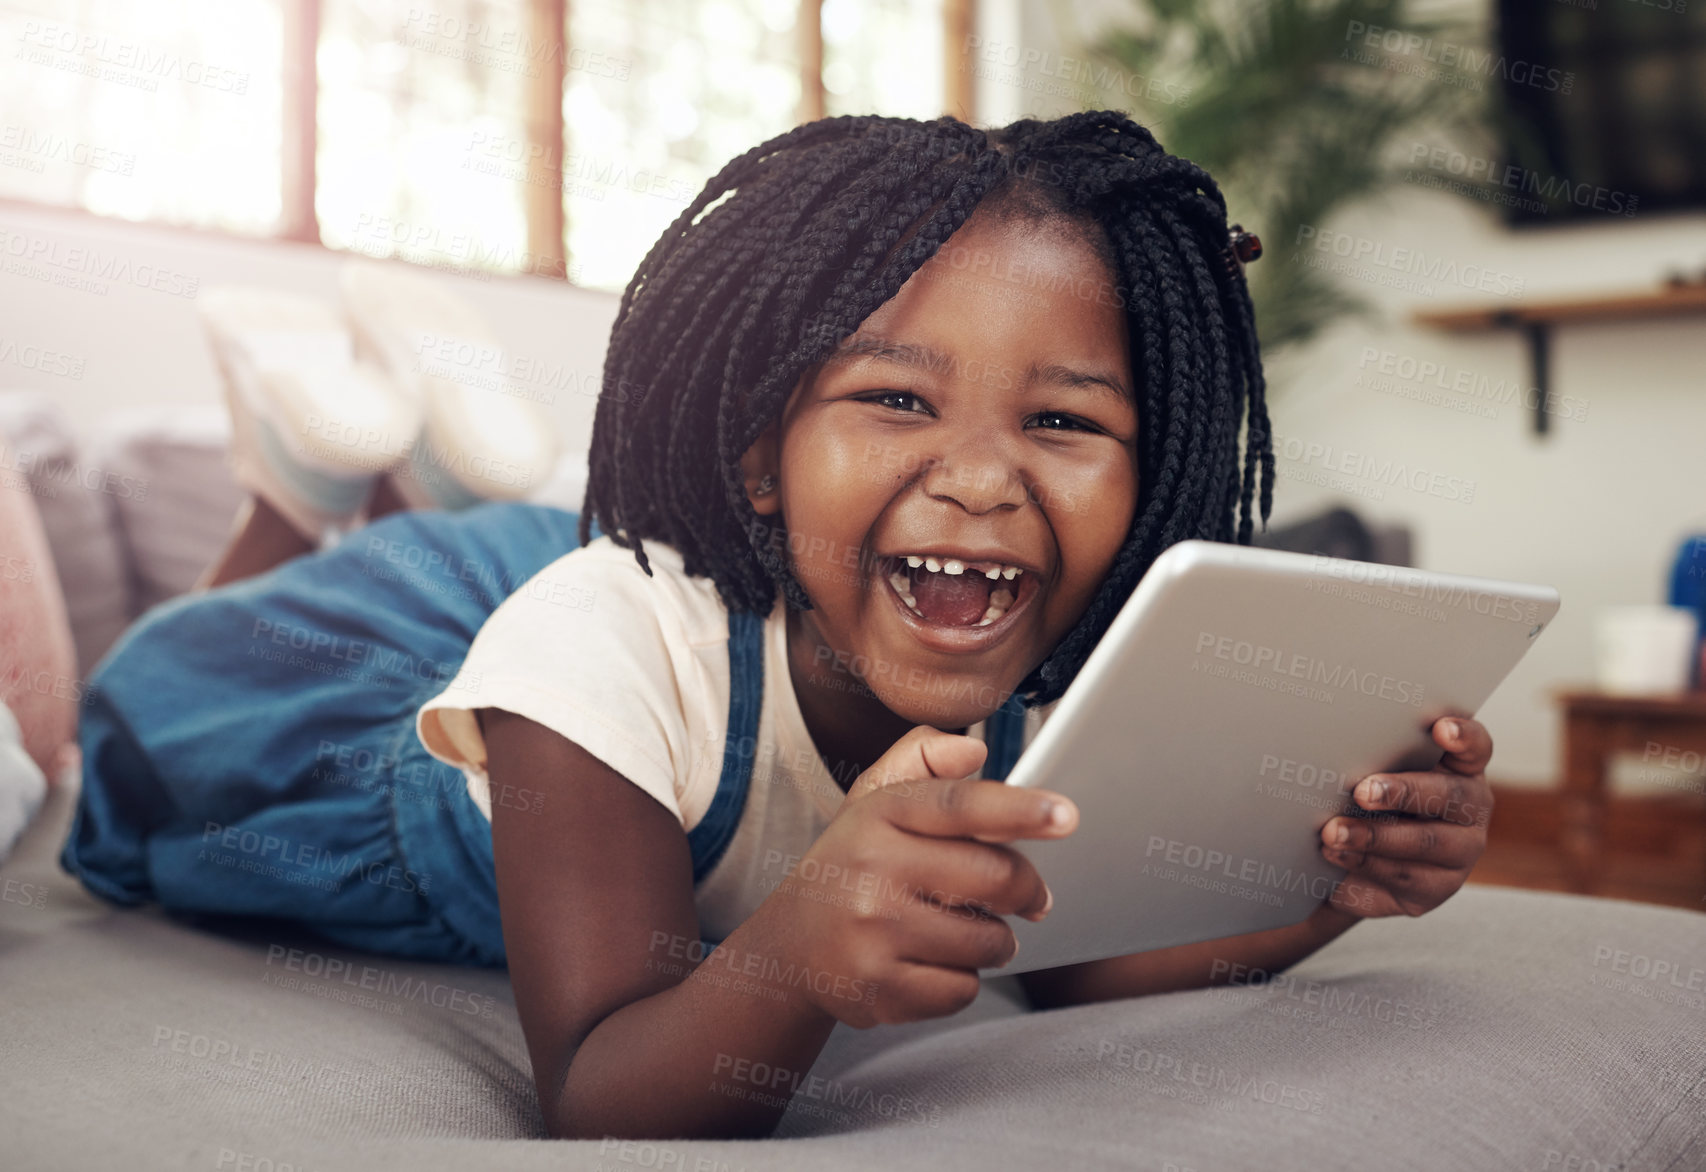 Buy stock photo Portrait of an adorable little girl having fun while using a digital tablet at home